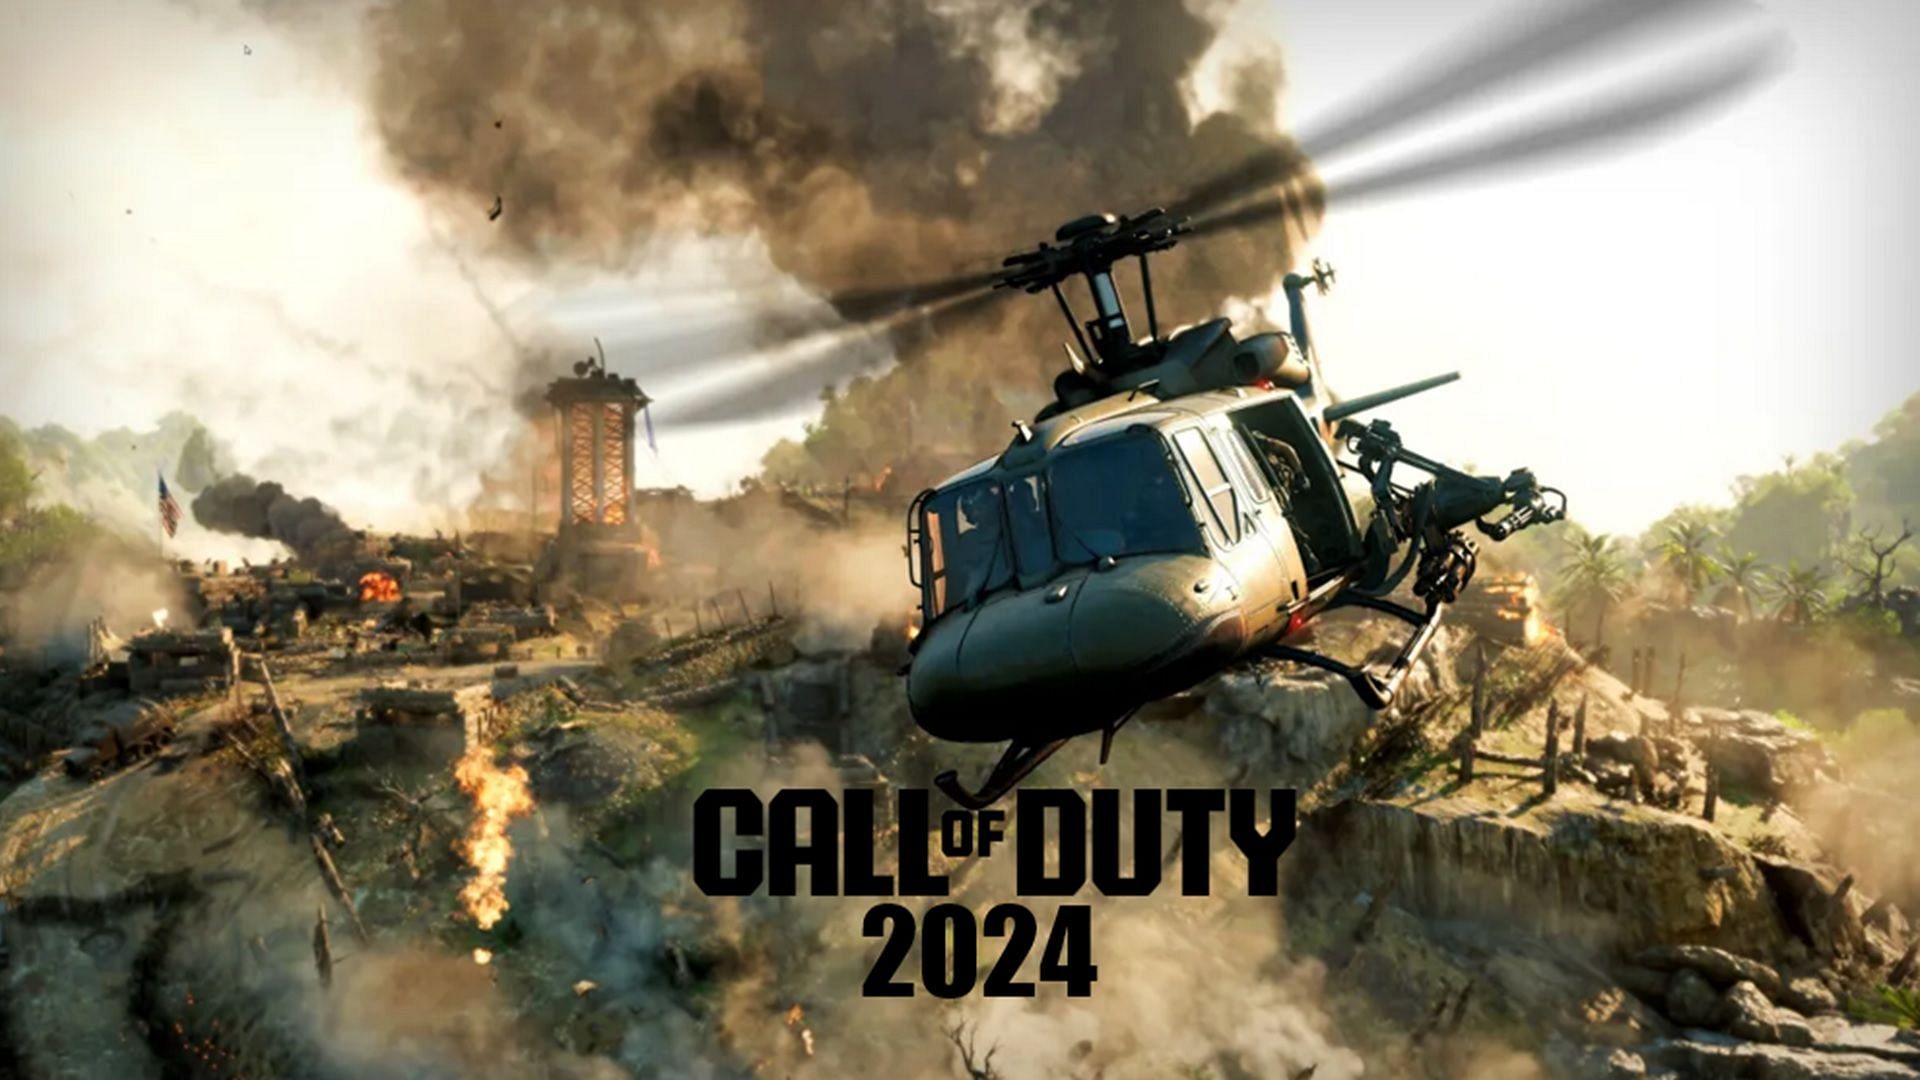 CoD 2024 is expected to be released globally in October (Image via Activision)